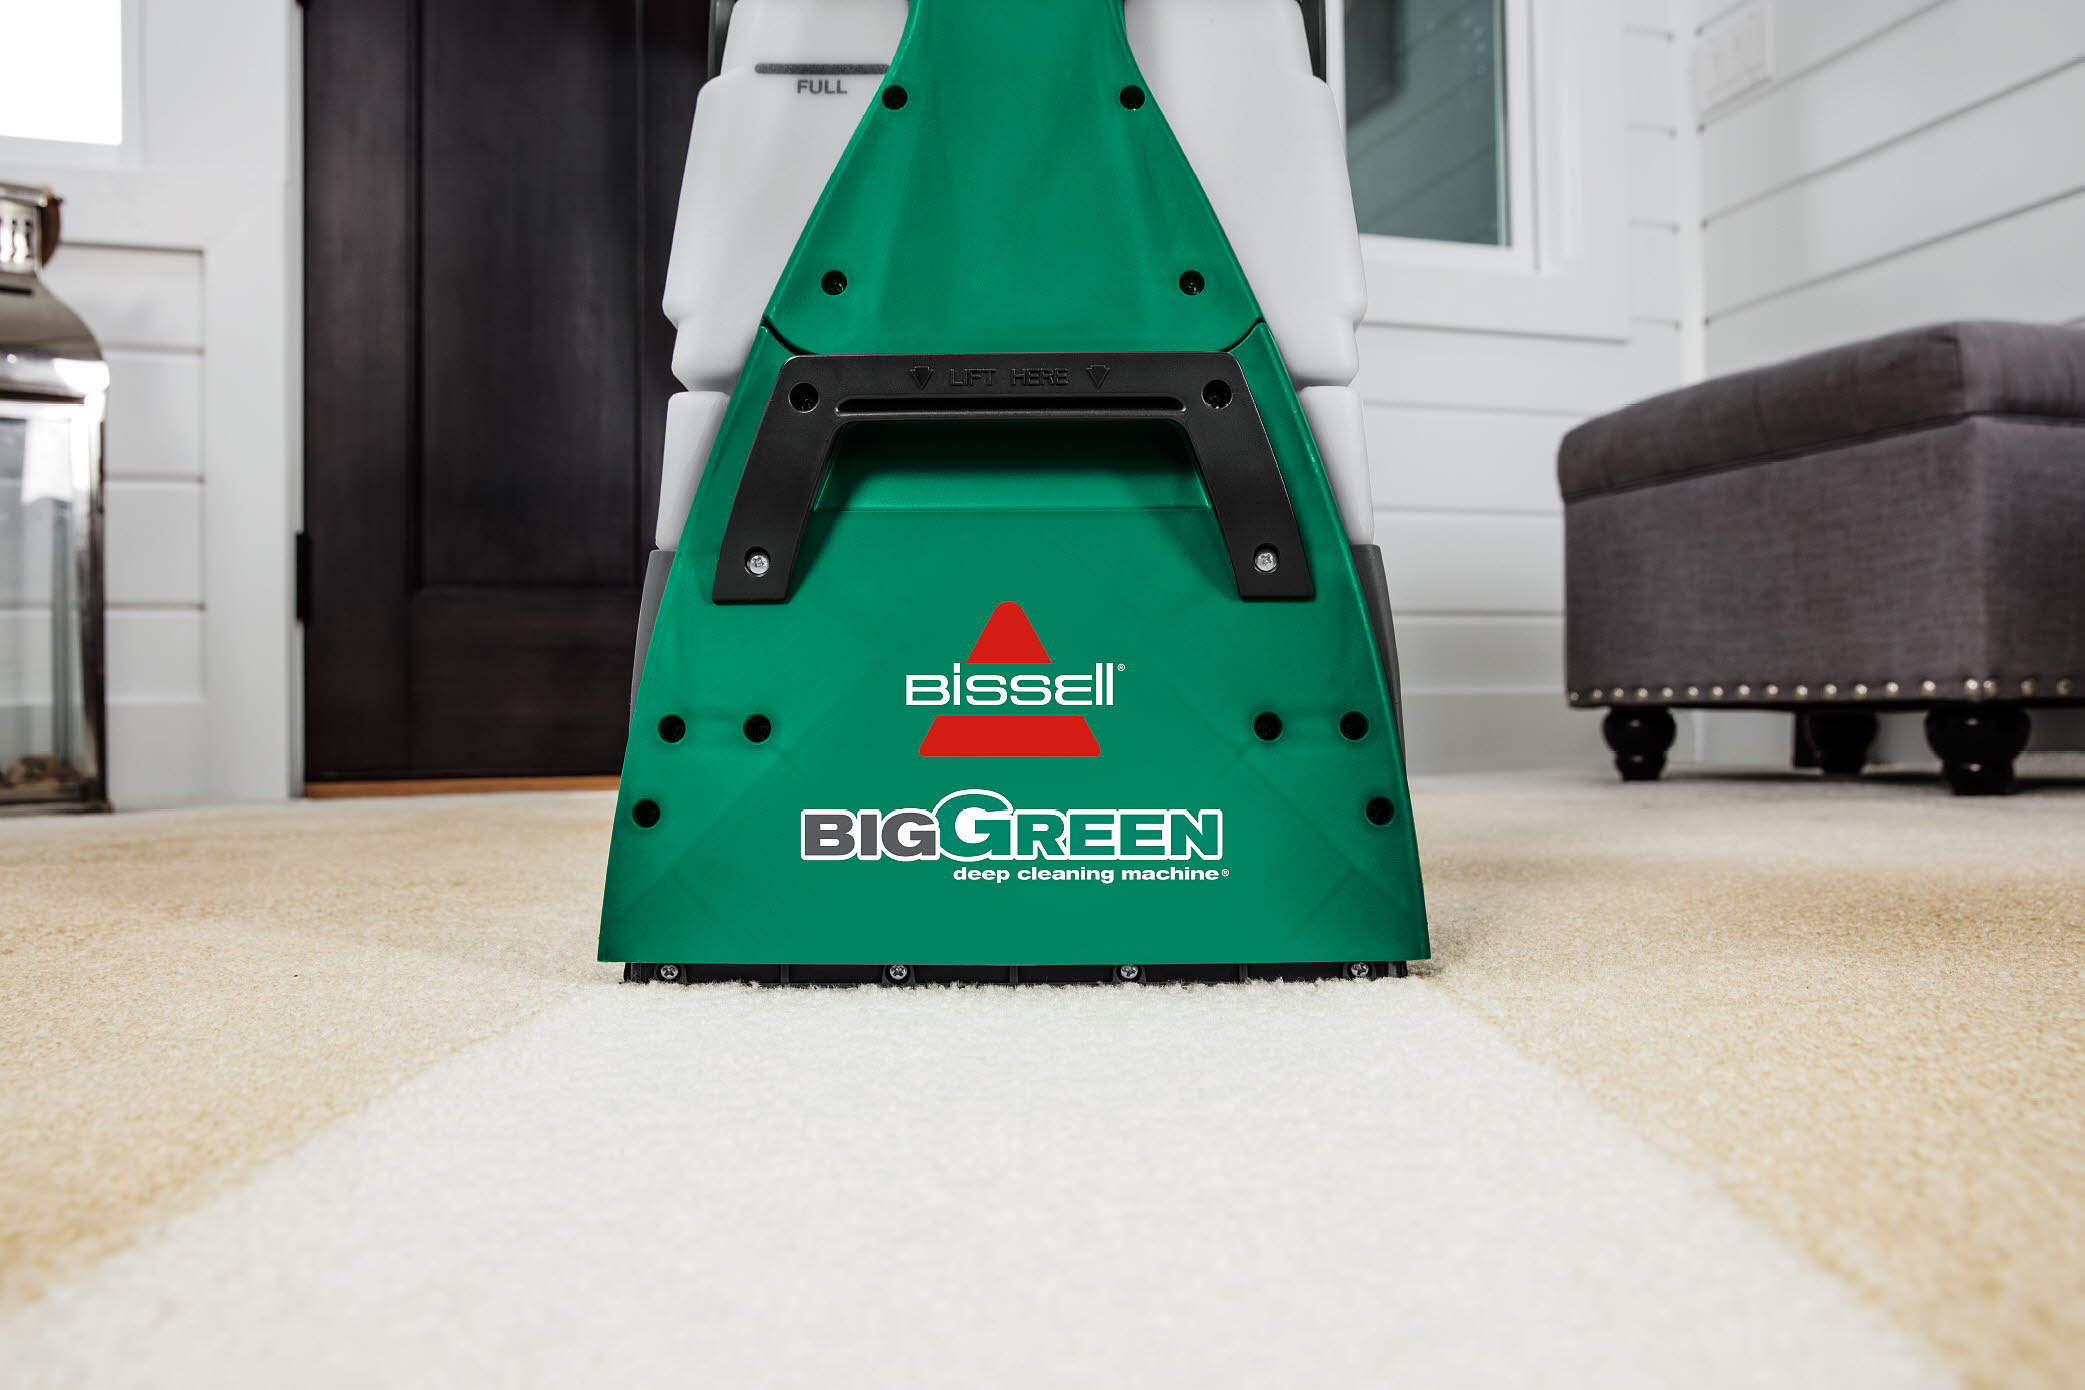 BISSELL Big Green Machine Professional Carpet Cleaner, 86T3 - image 9 of 20